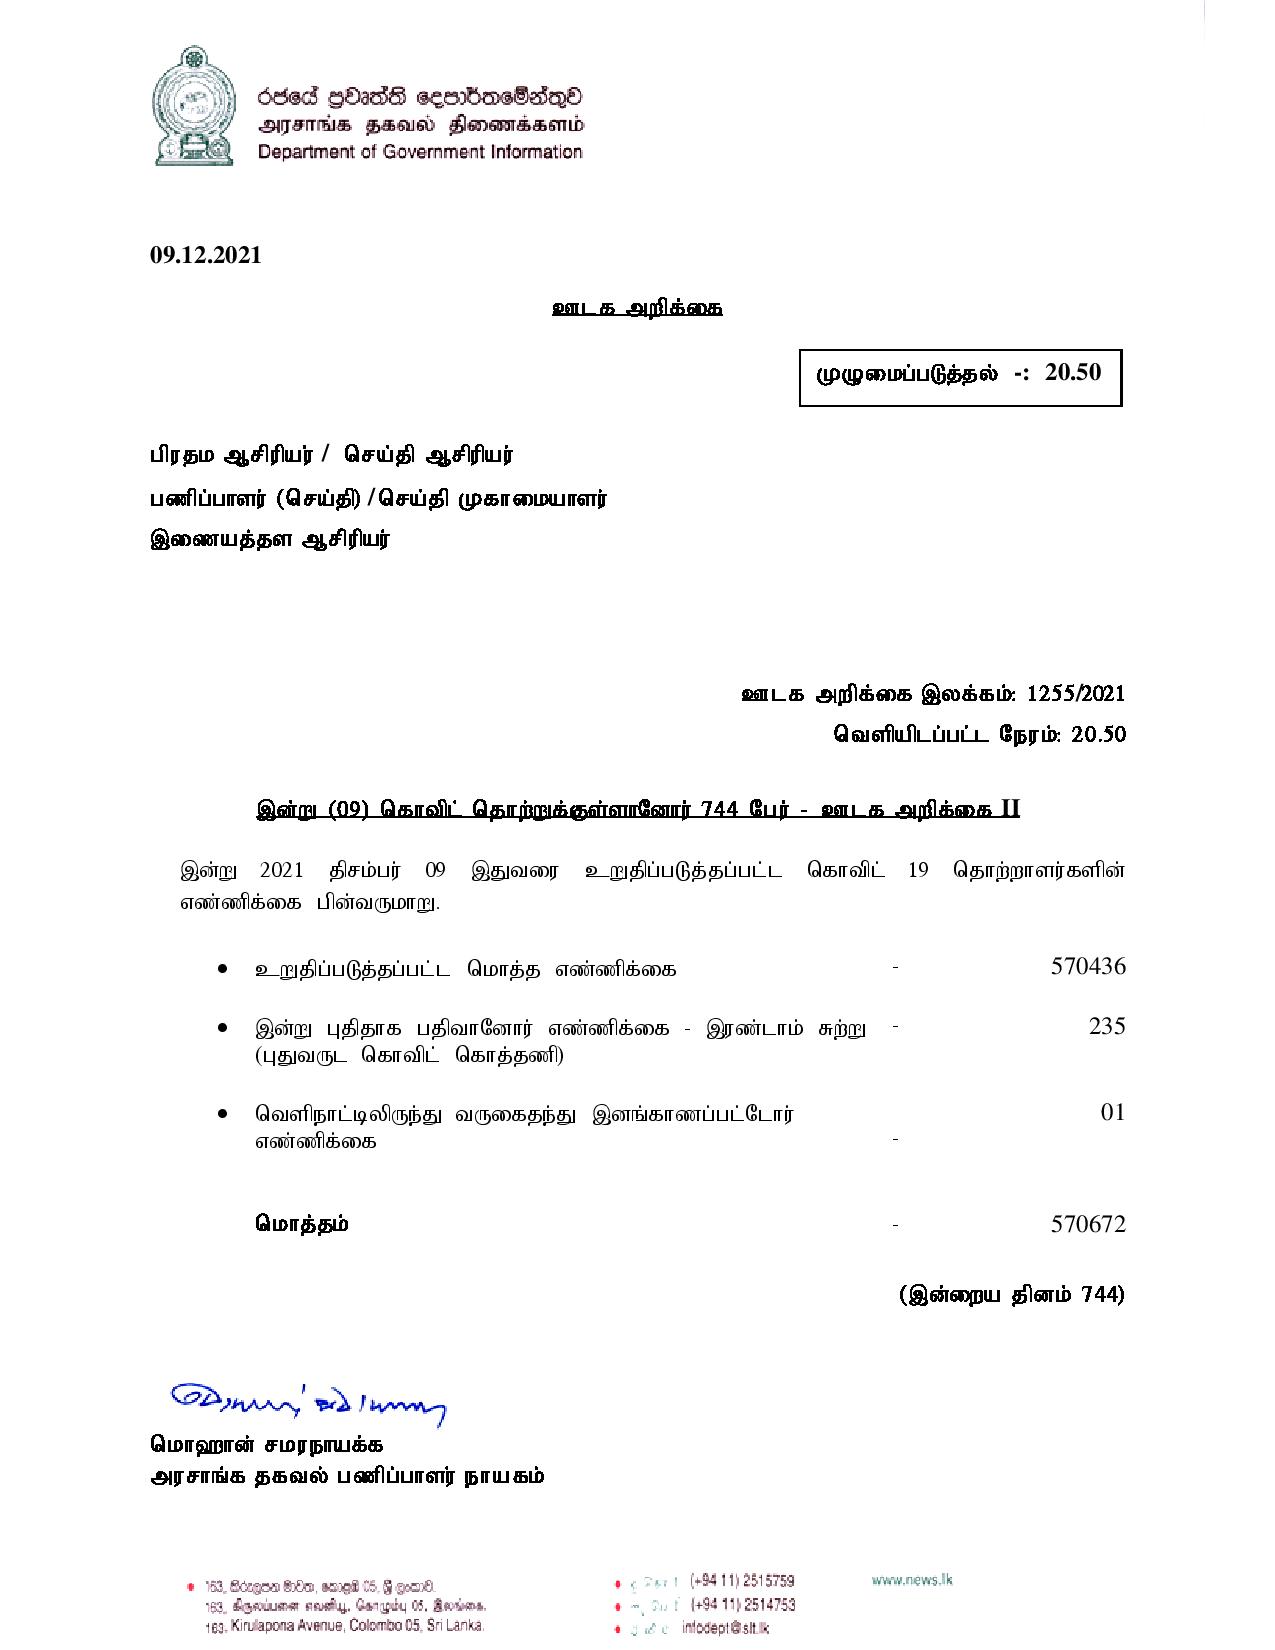 Release No 1255 Tamil page 001